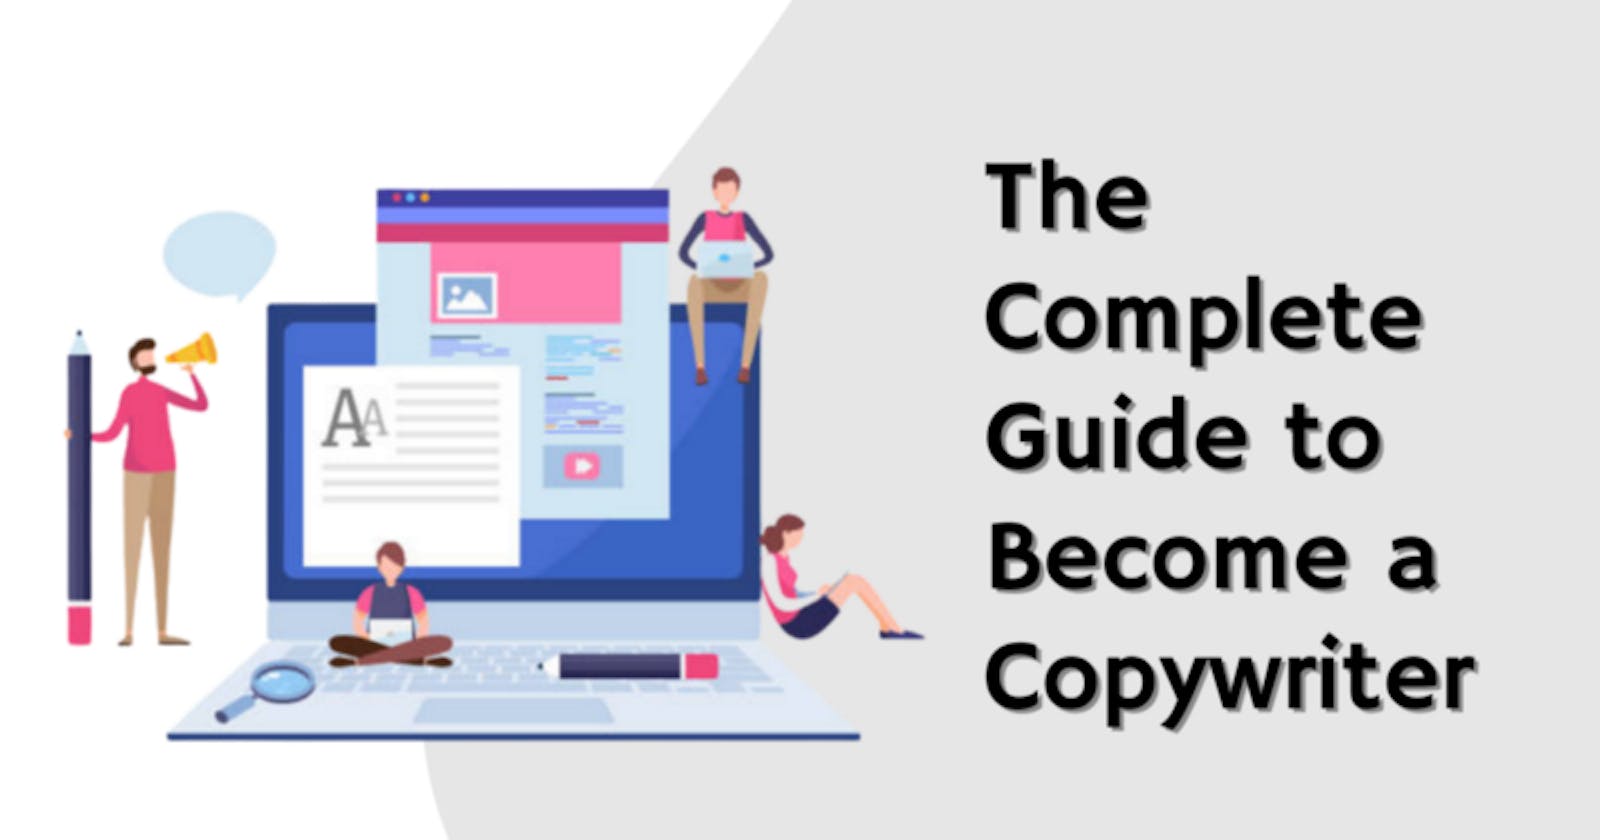 The Complete Guide to Become a Copywriter